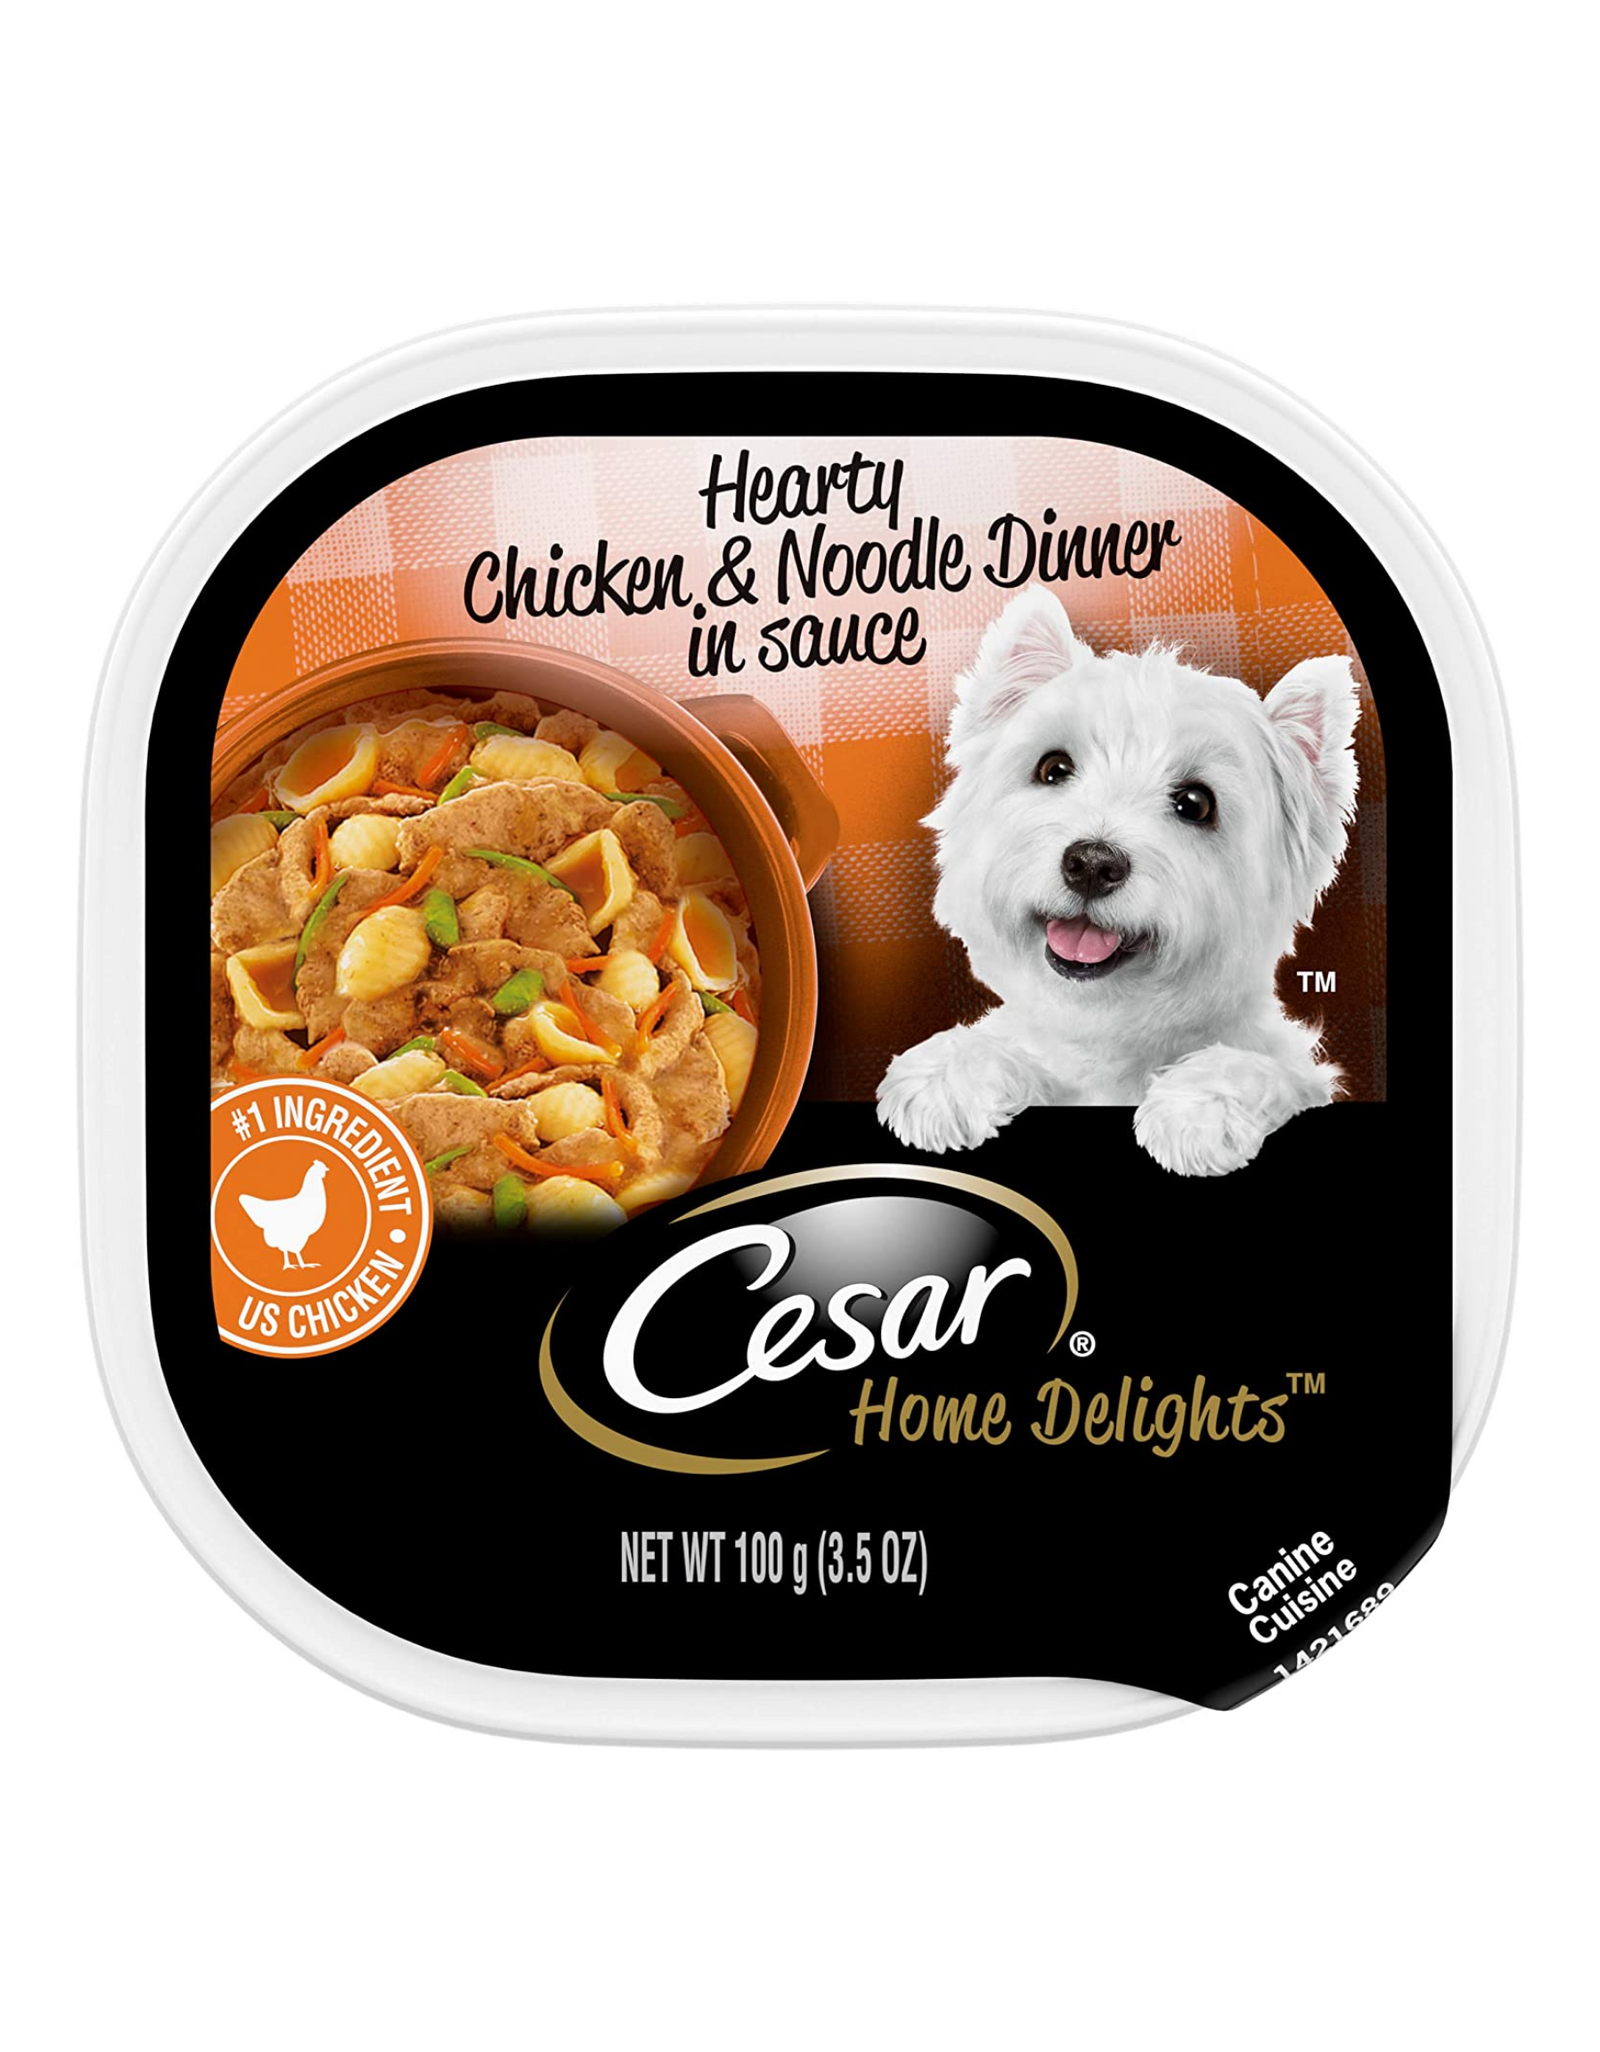 CESAR HOME DELIGHTS Chicken & Noodle Dinner in Sauce, 3.5 oz, 24 Count